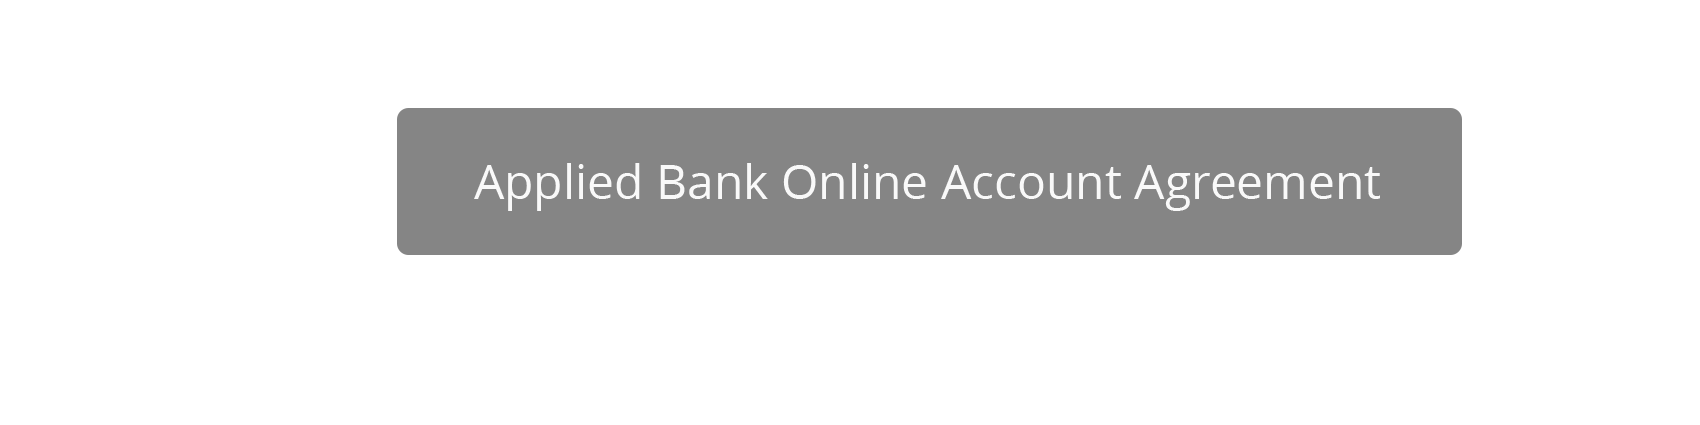 Applied Bank Online Account Agreement